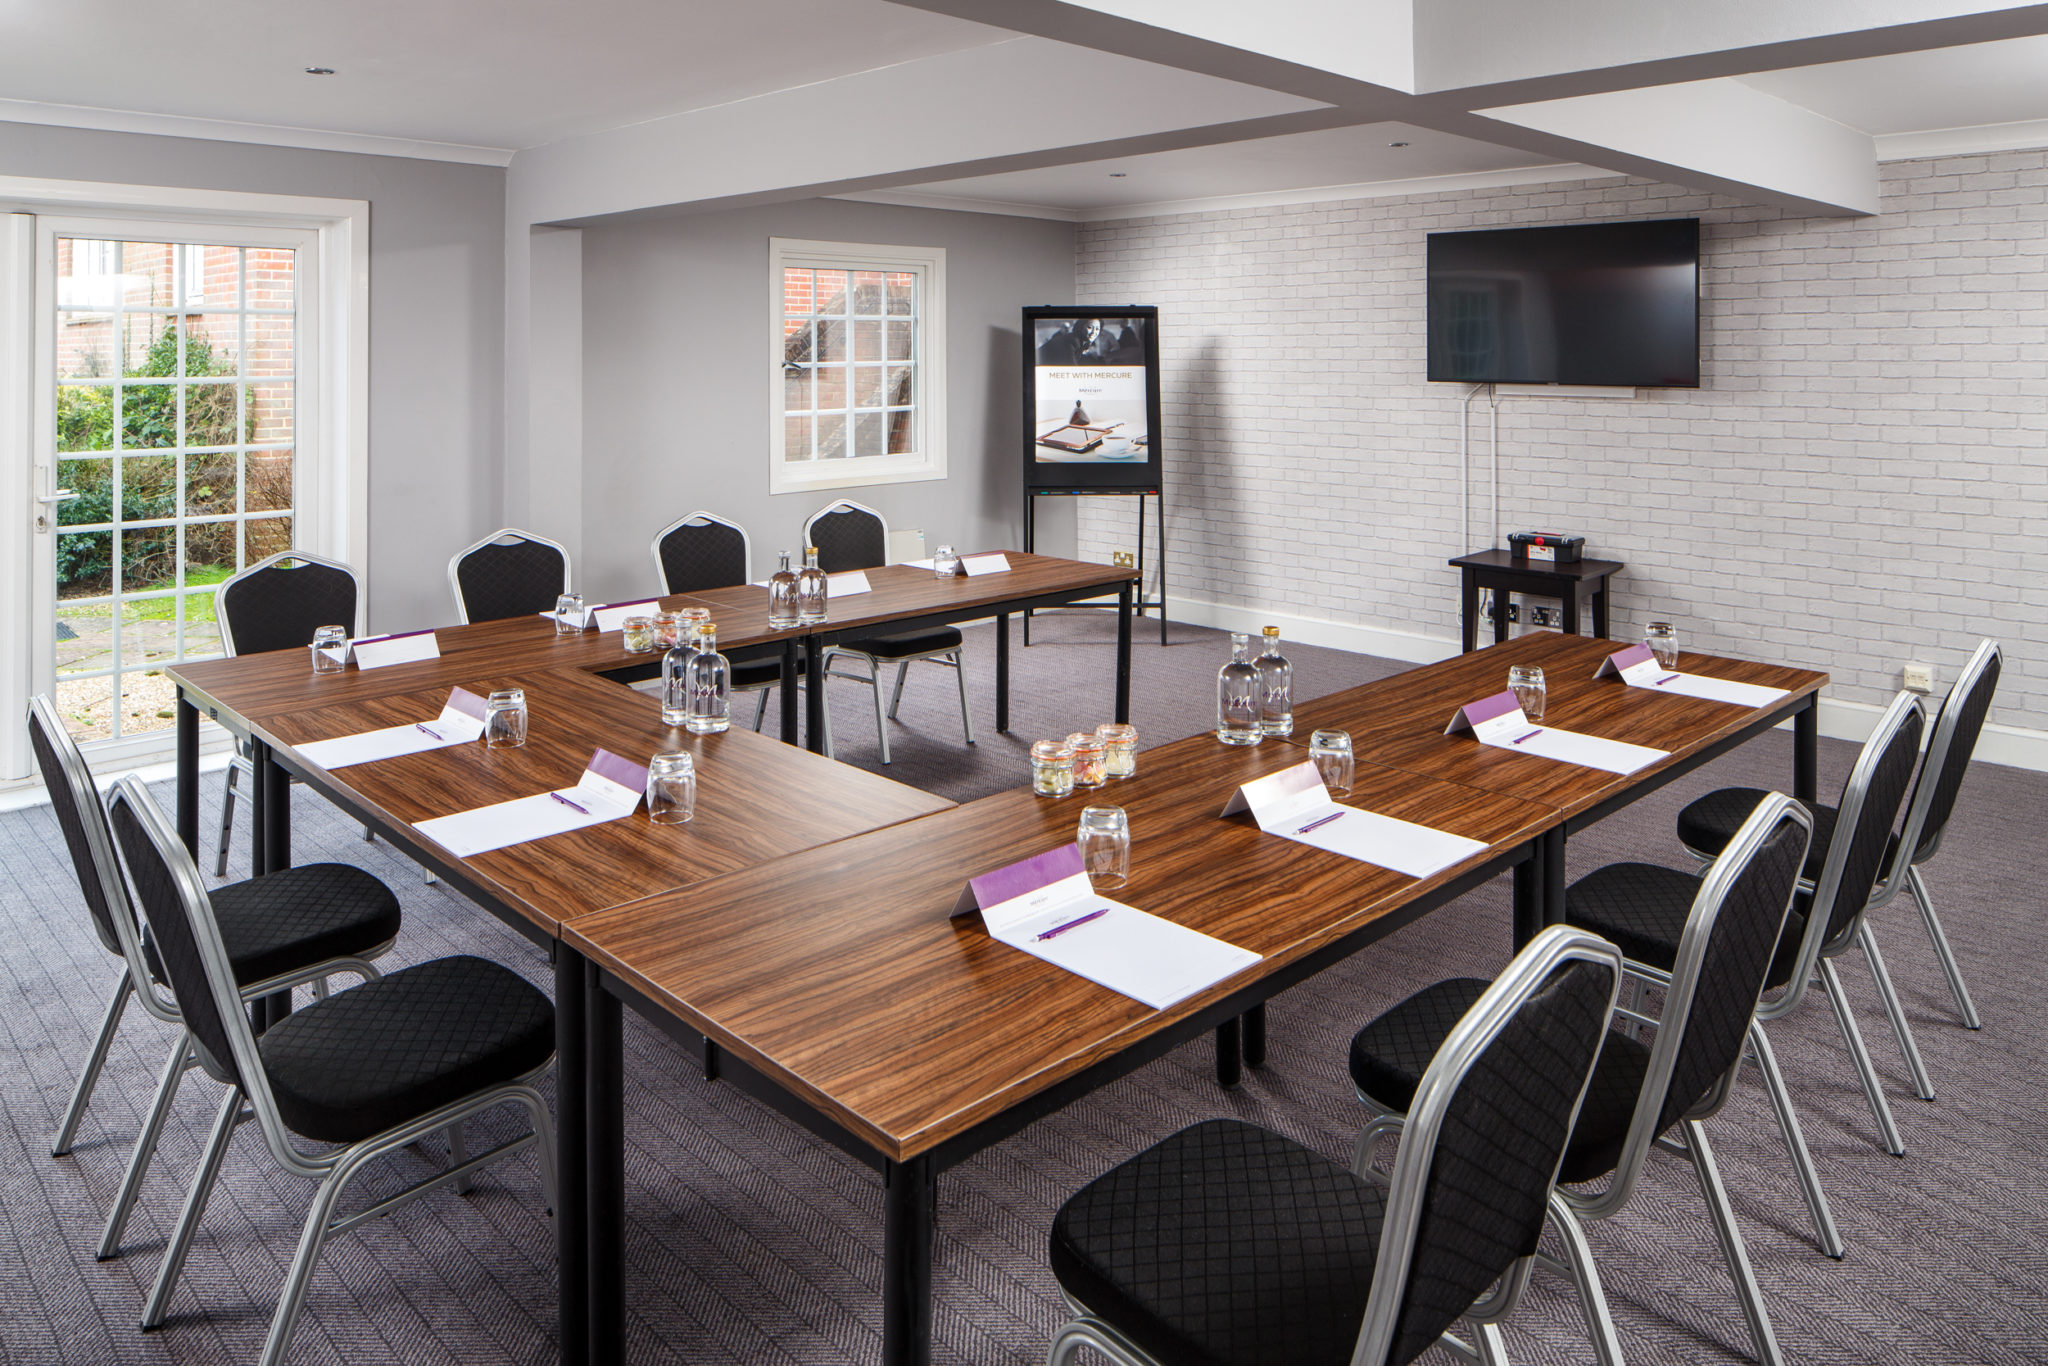 Conference and Meeting facilities at Mercure Tunbridge Wells Hotel